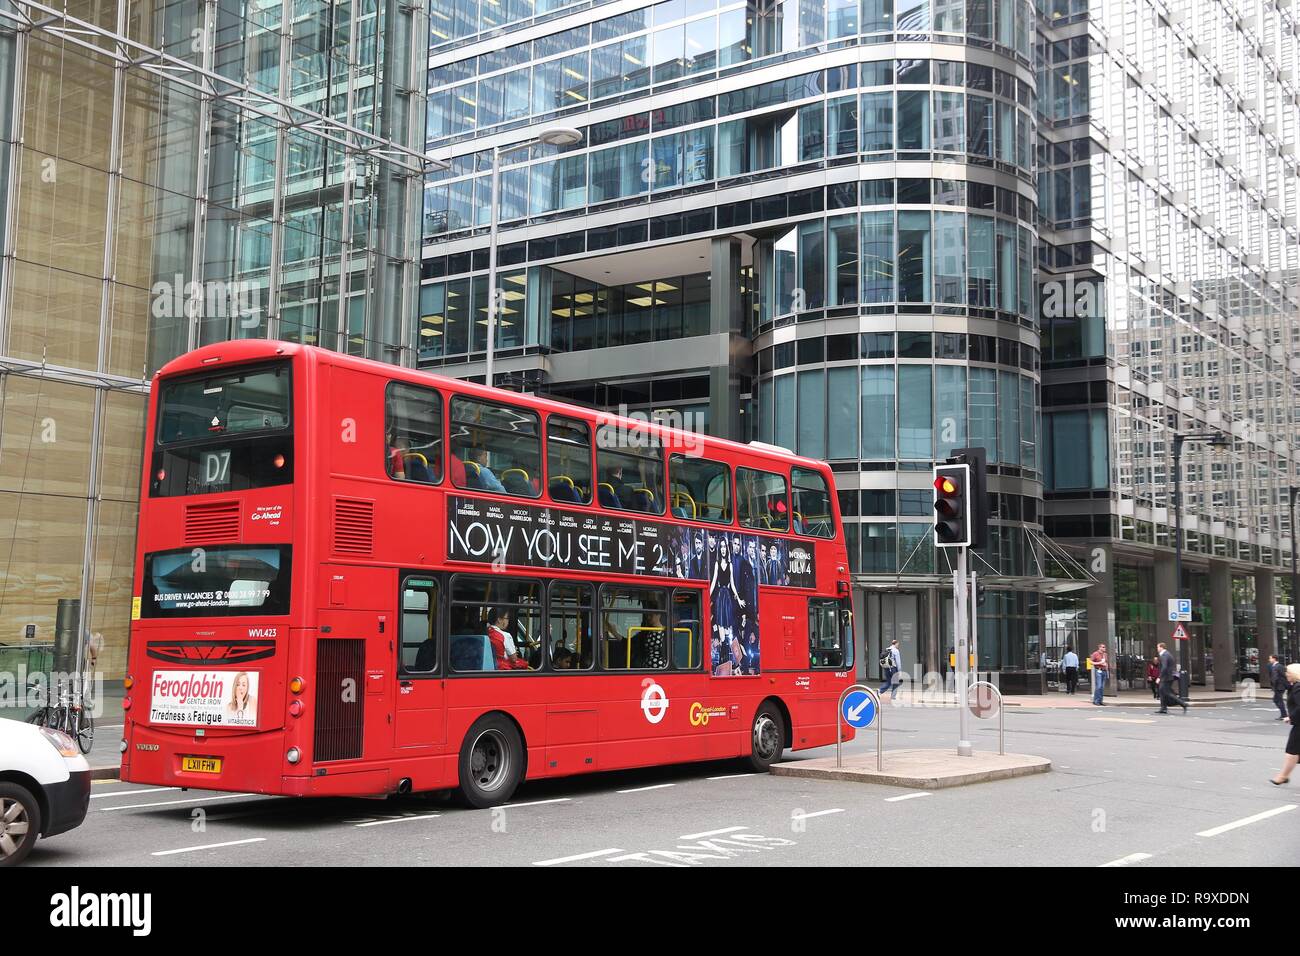 LONDON, UK - JULY 8, 2016: People ride a double decker bus in Canary Wharf,  London, UK. Transport for London (TFL) operates 8,000 buses on 673 routes  Stock Photo - Alamy